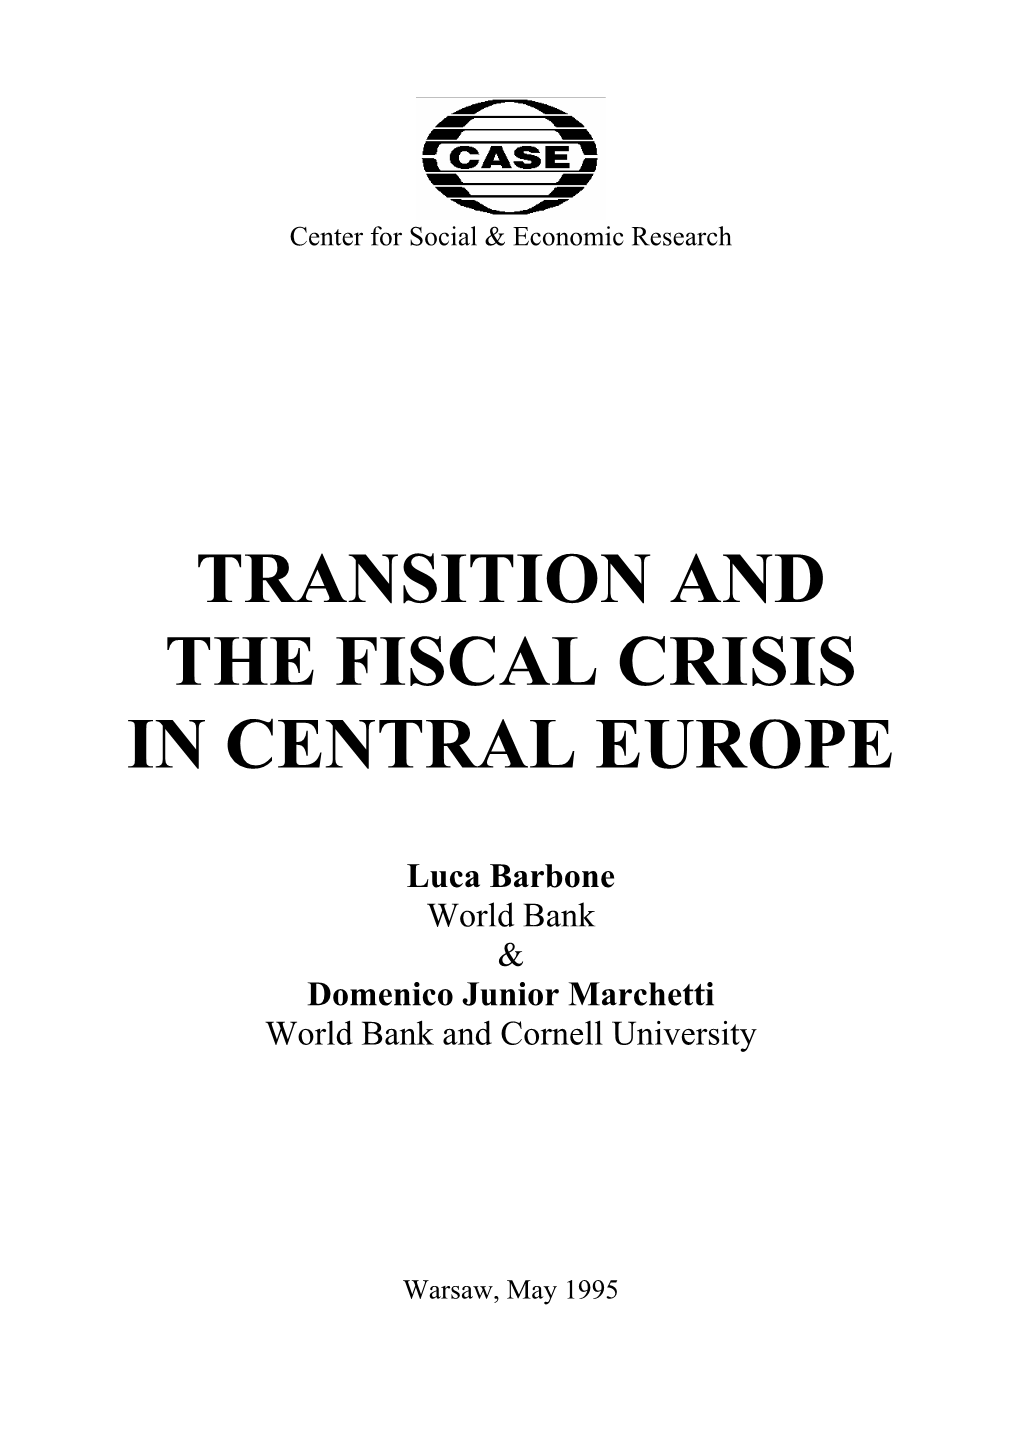 Transition and the Fiscal Crisis in Central Europe